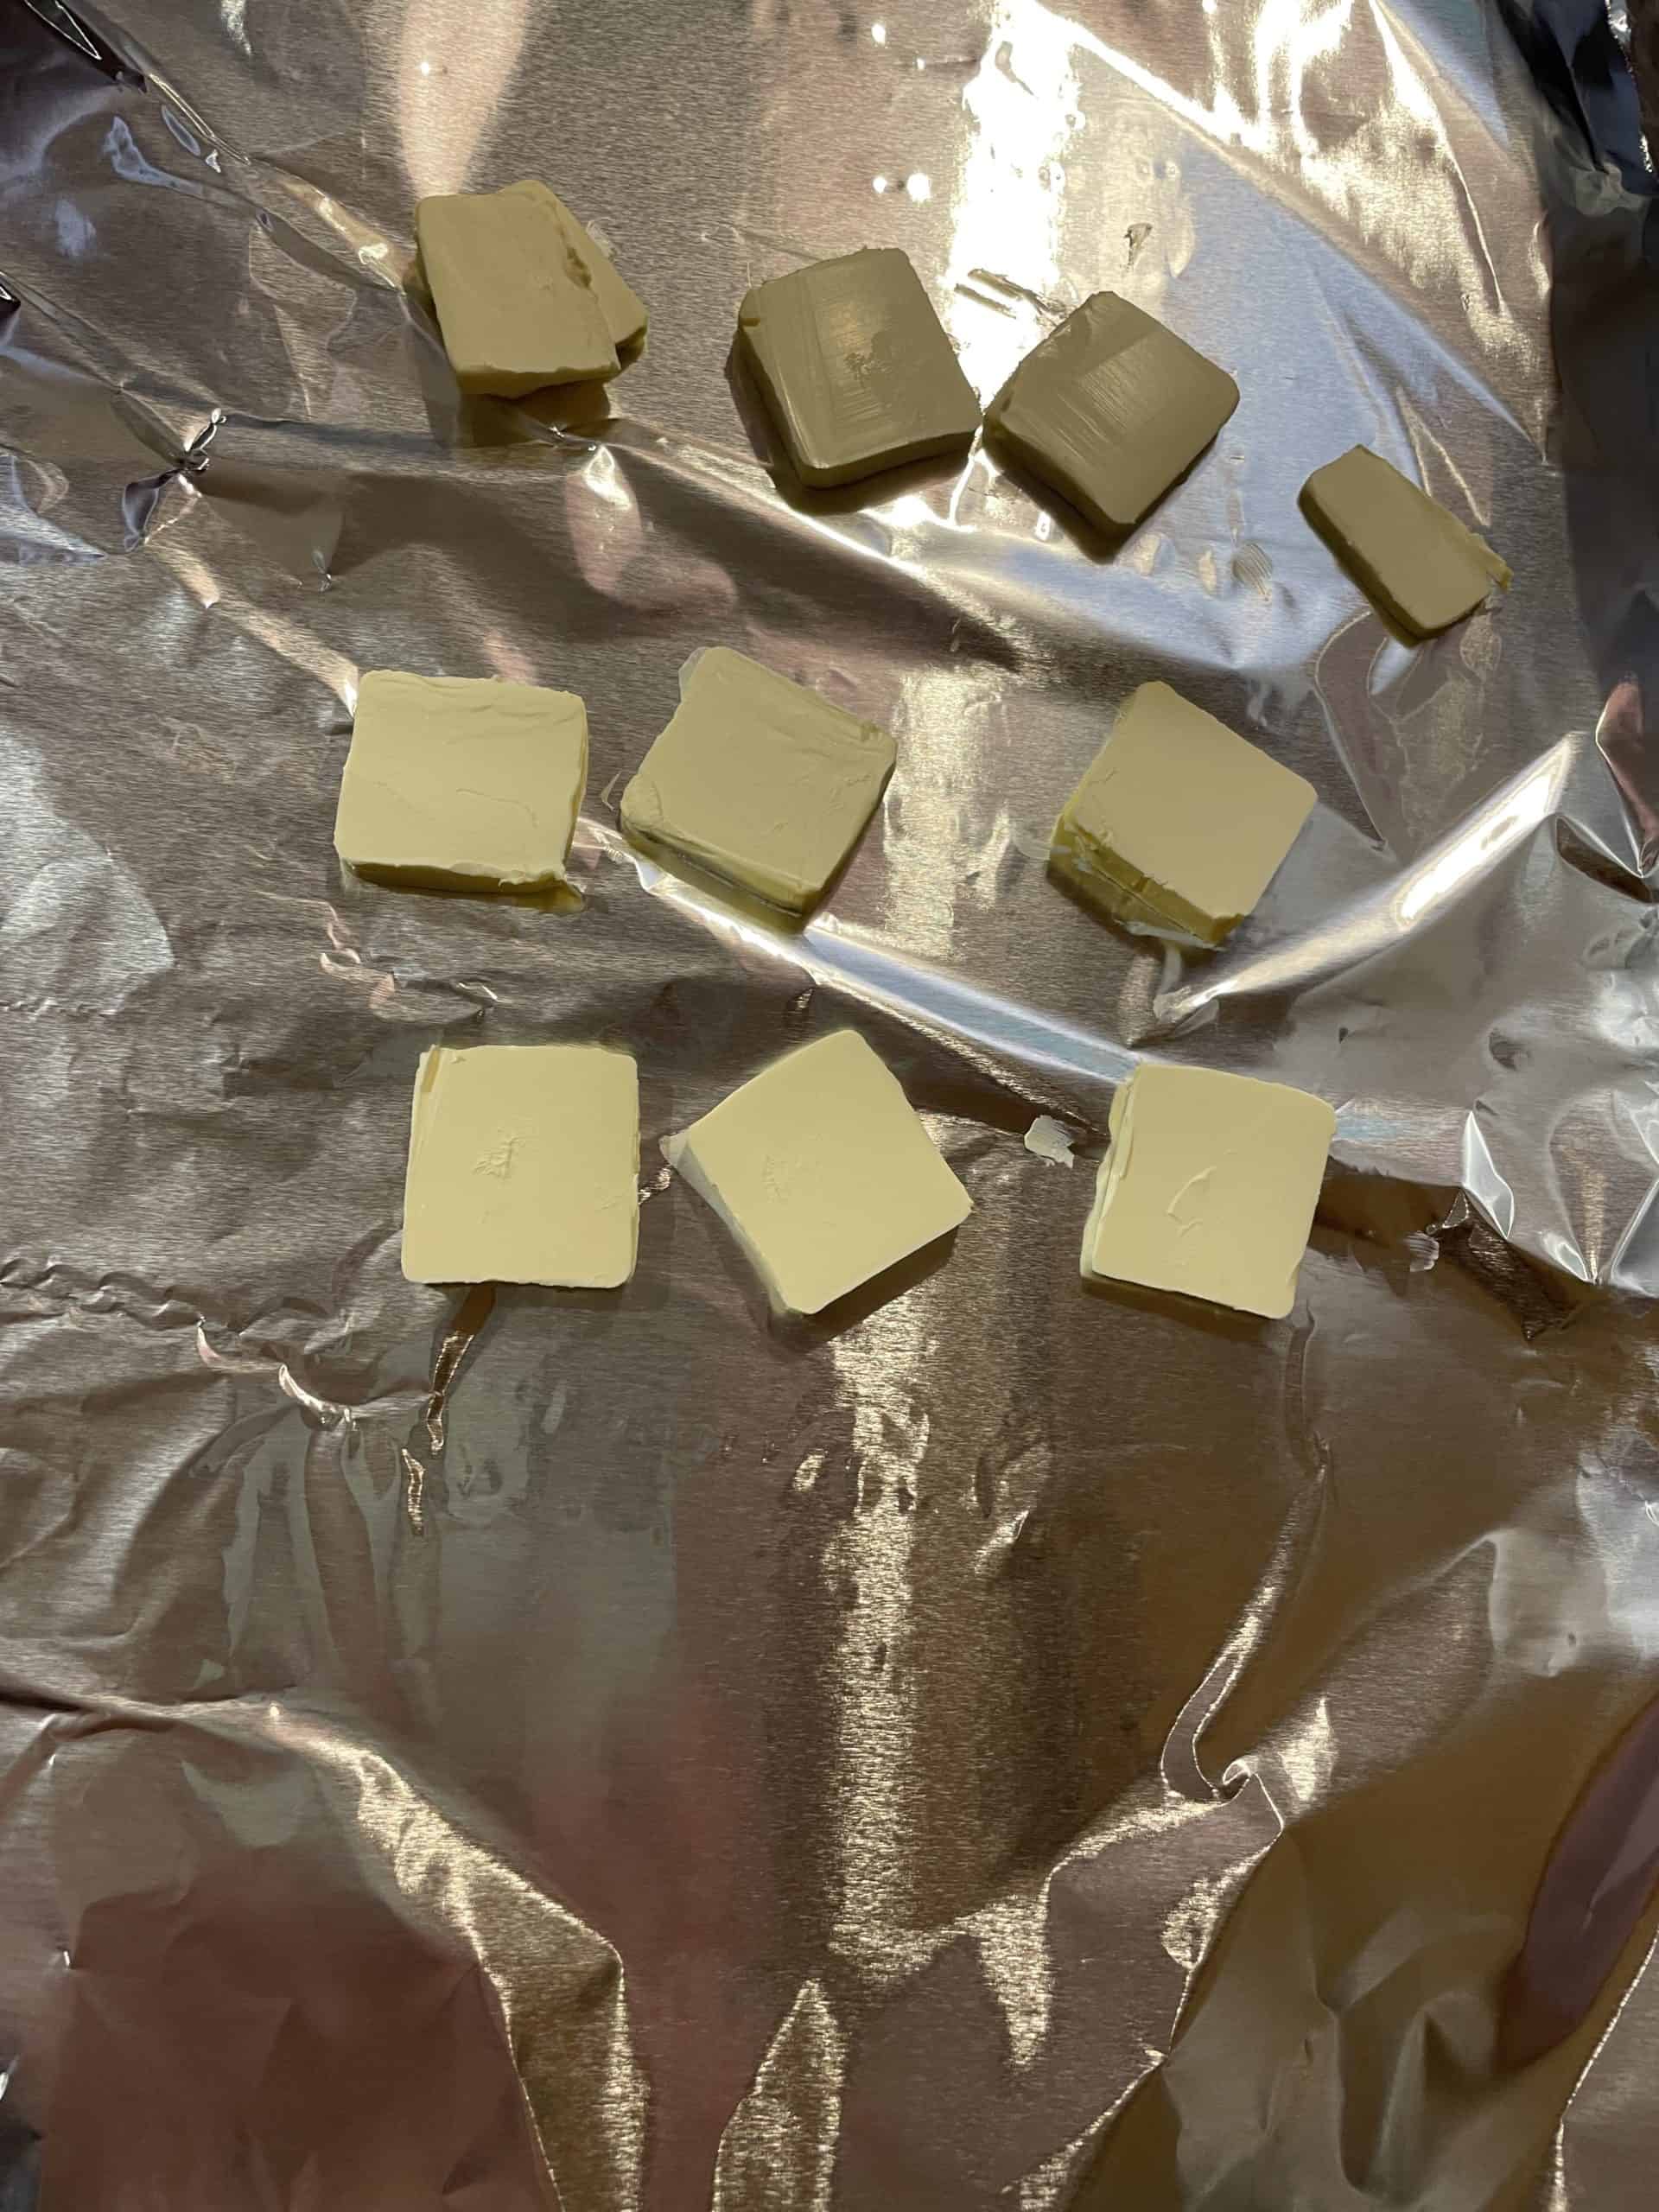 Butter/Margarine patties on a sheet of foil.